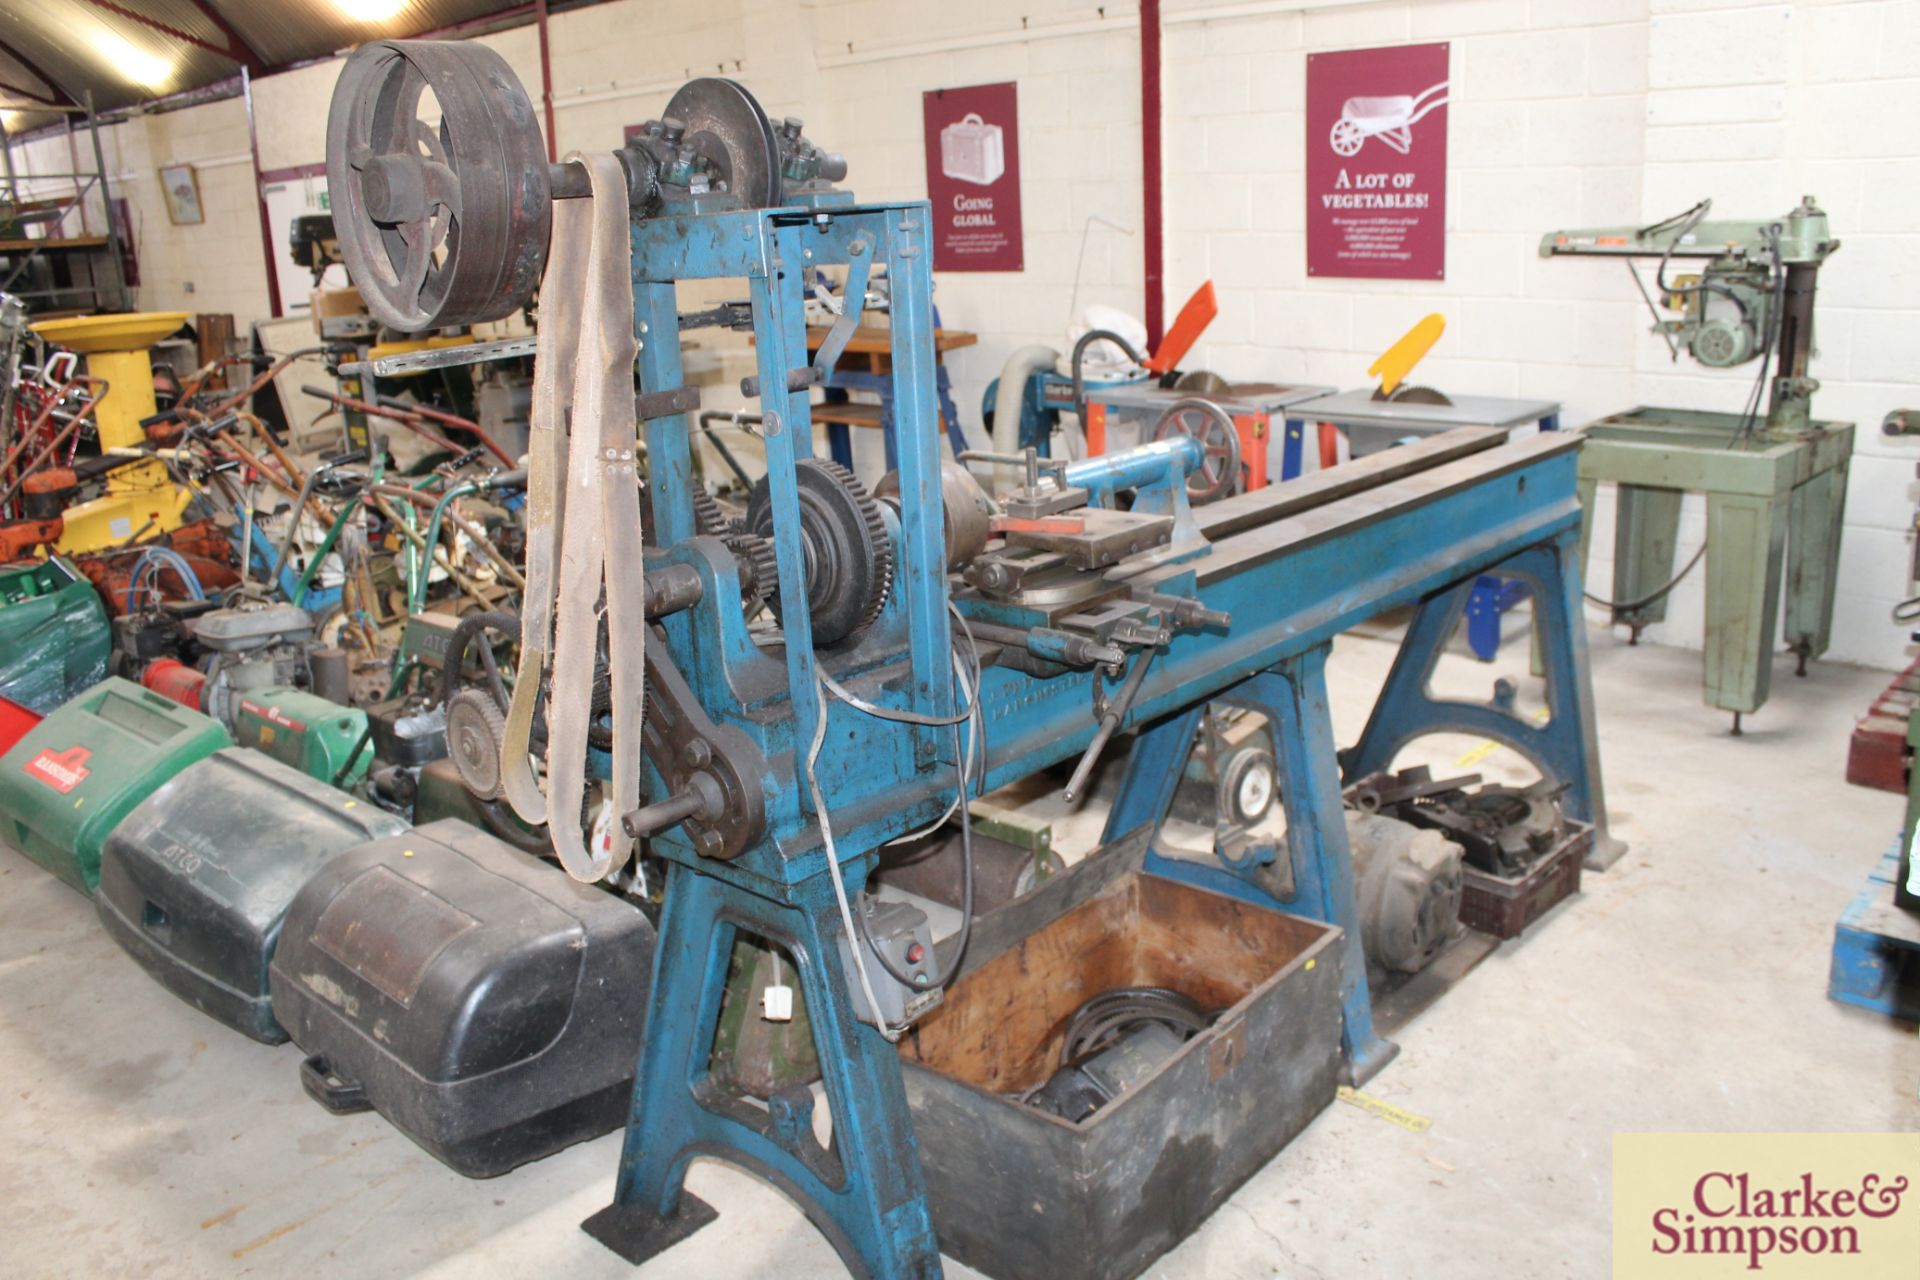 Whitworth metalwork lathe. With fixed steady and face plate.